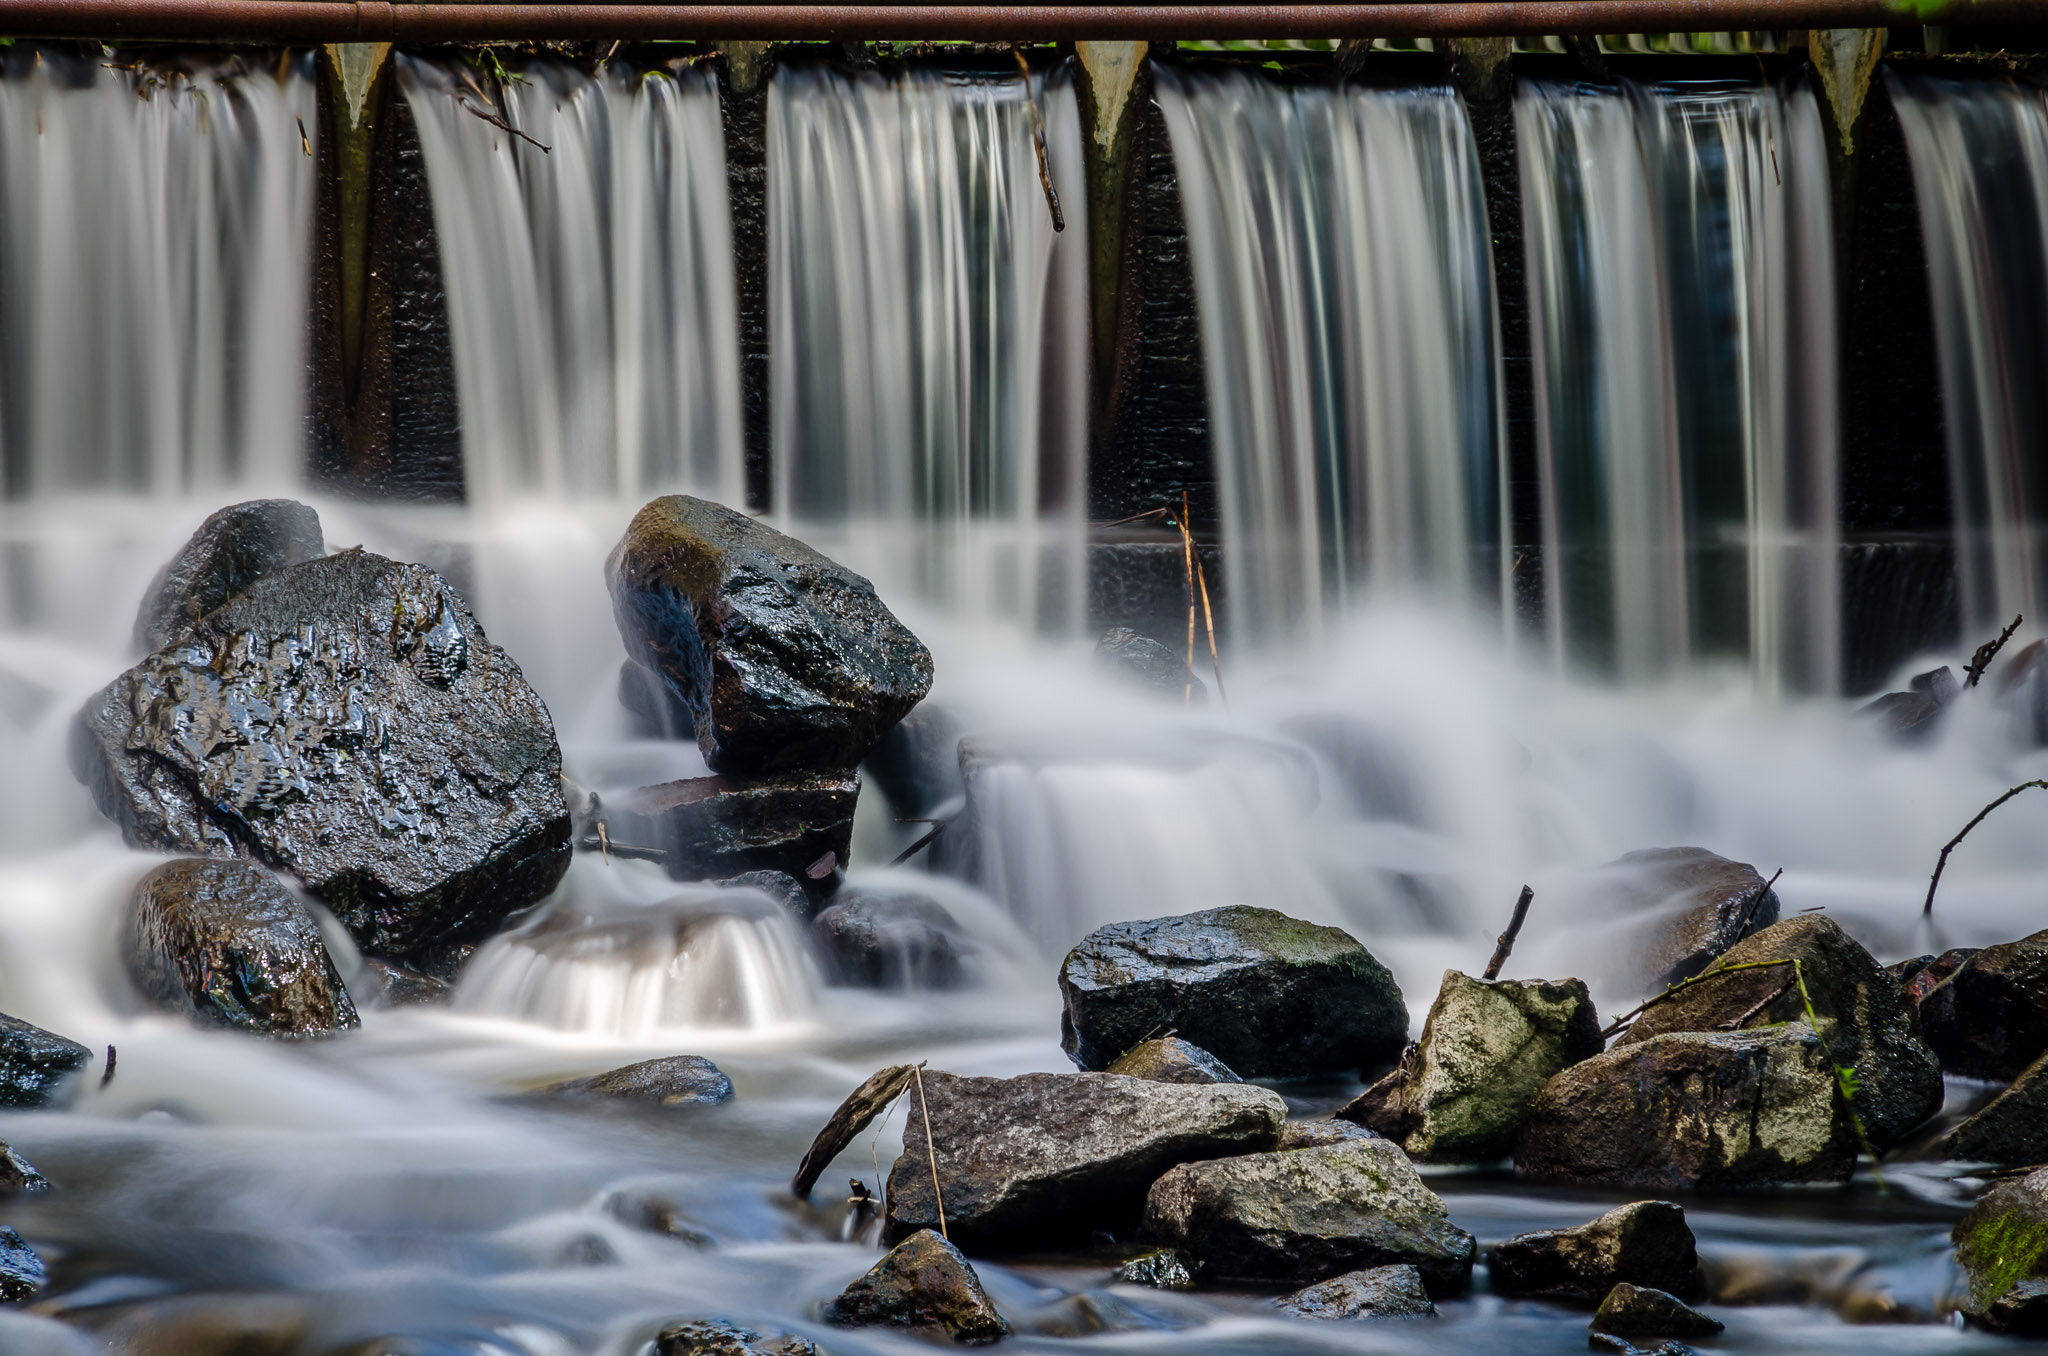 Nikon D5100 + Sigma 18-200mm F3.5-6.3 DC sample photo. Small waterfall in alingsås, sweden. photography